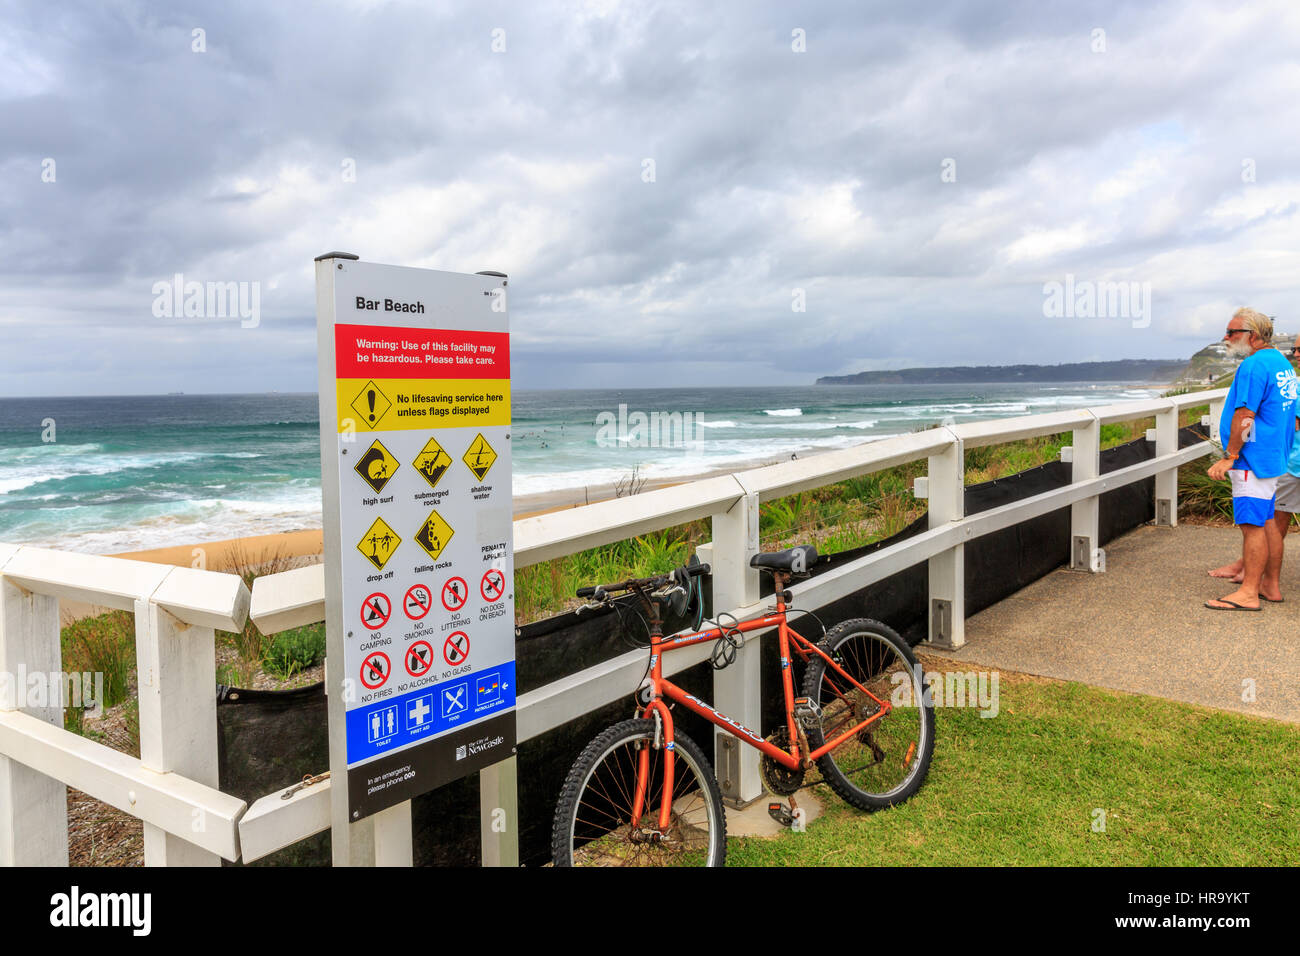 Bar Beach in Newcastle, the second largest city in New South Wales,Australia Stock Photo